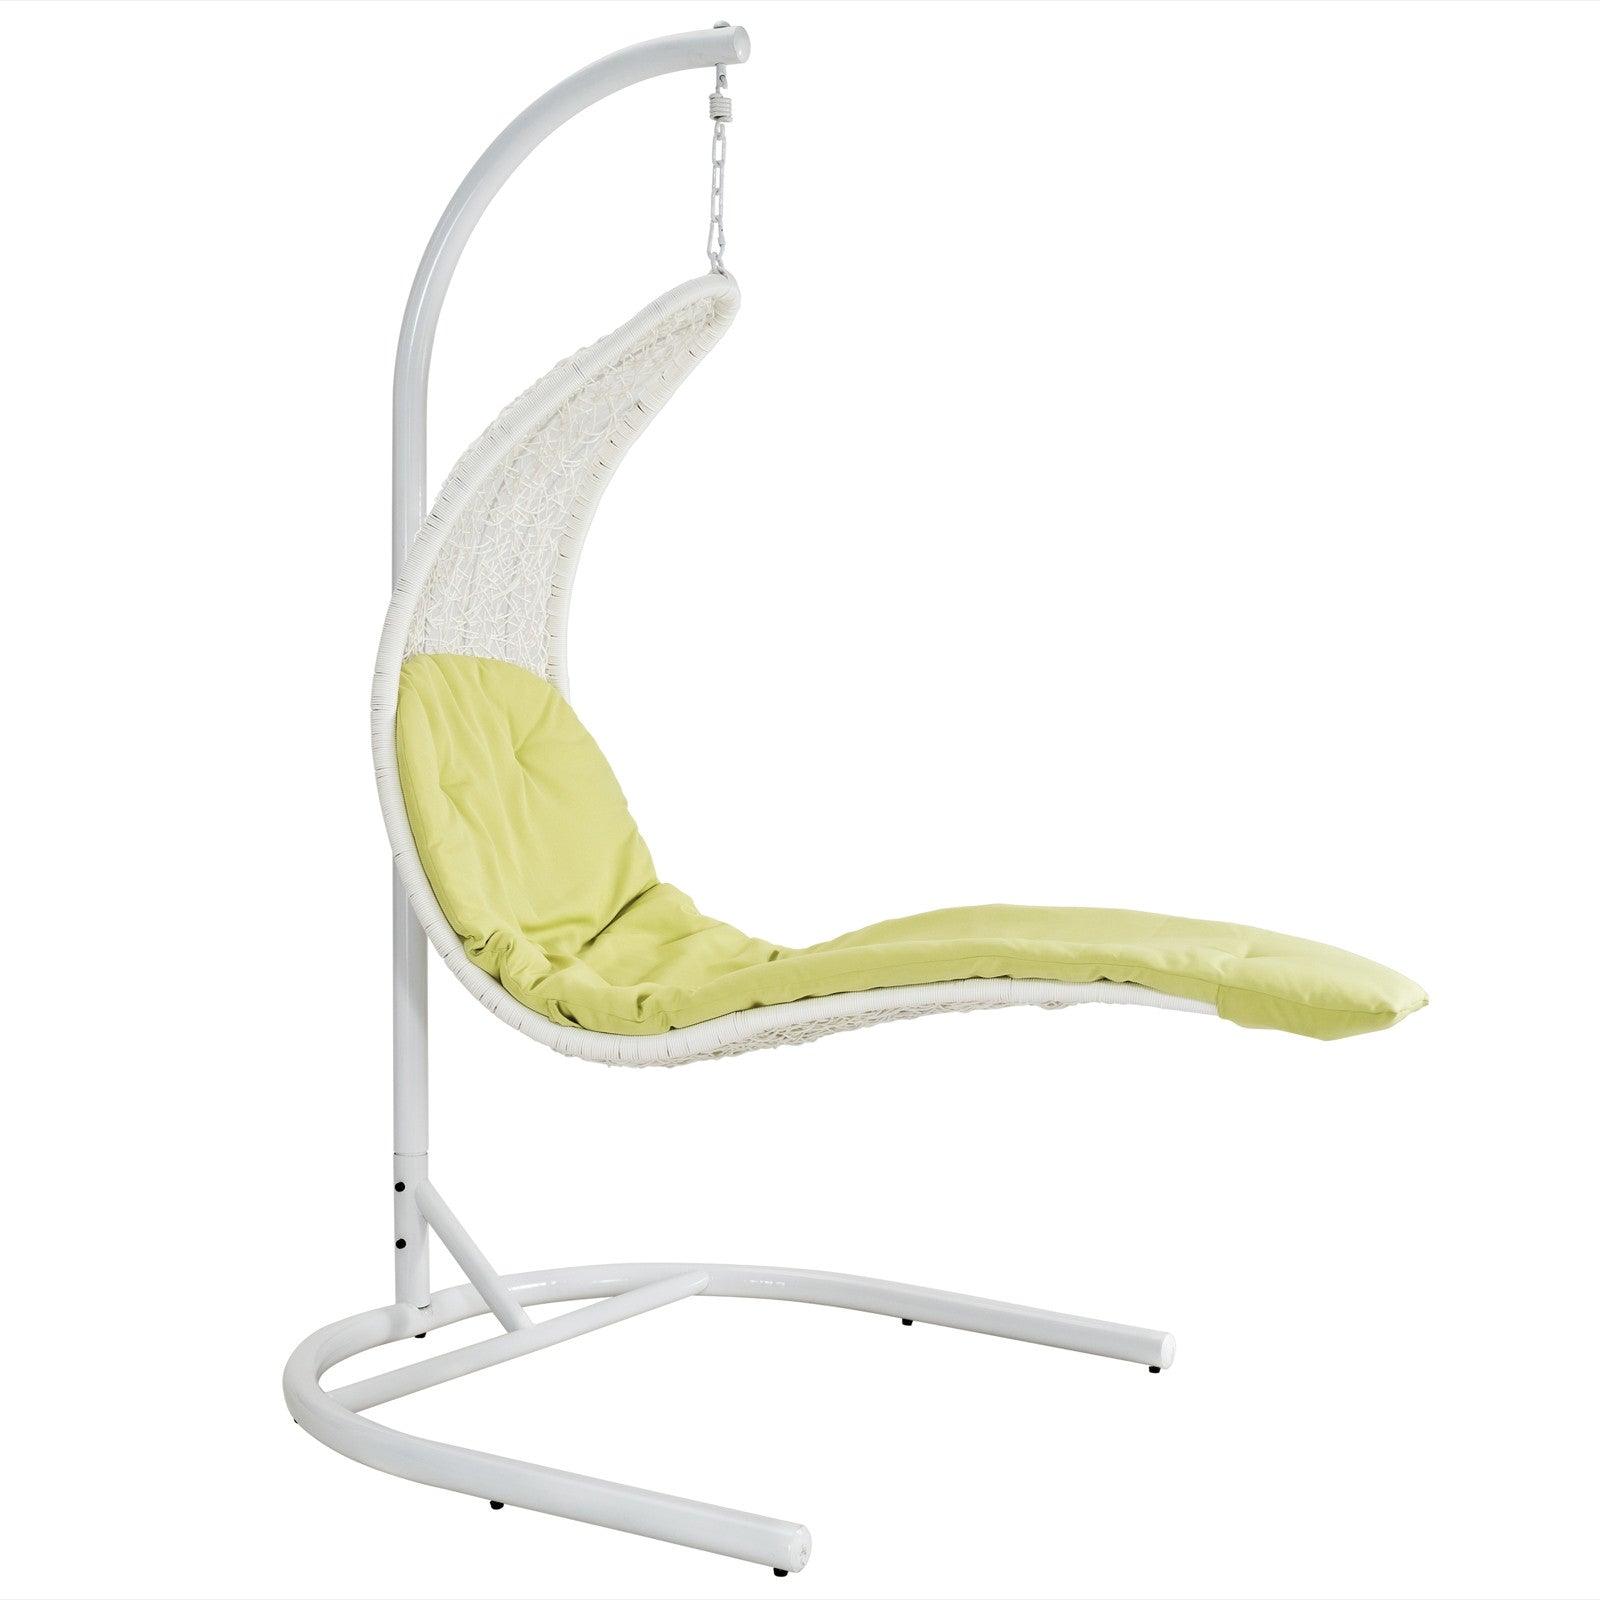 SWING OUTDOOR PATIO LOUNGE CHAIR - Euro Living Furniture